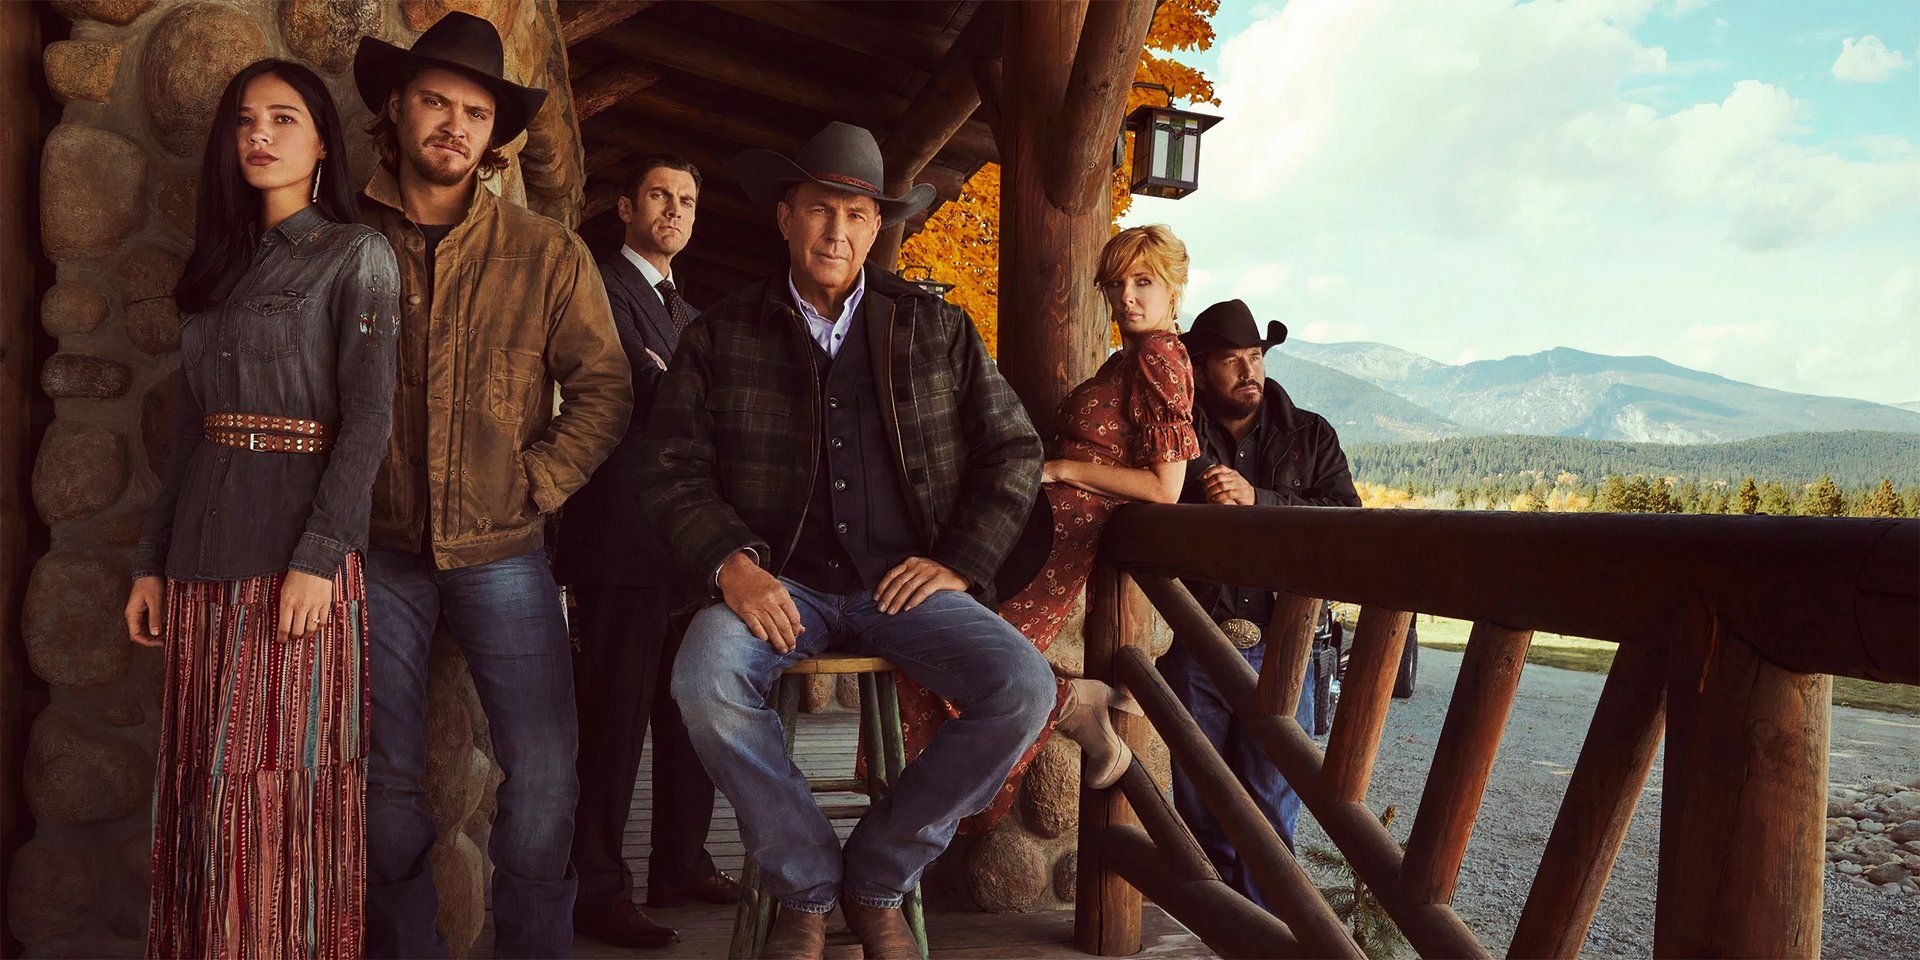 The cast of Yellowstone posing together